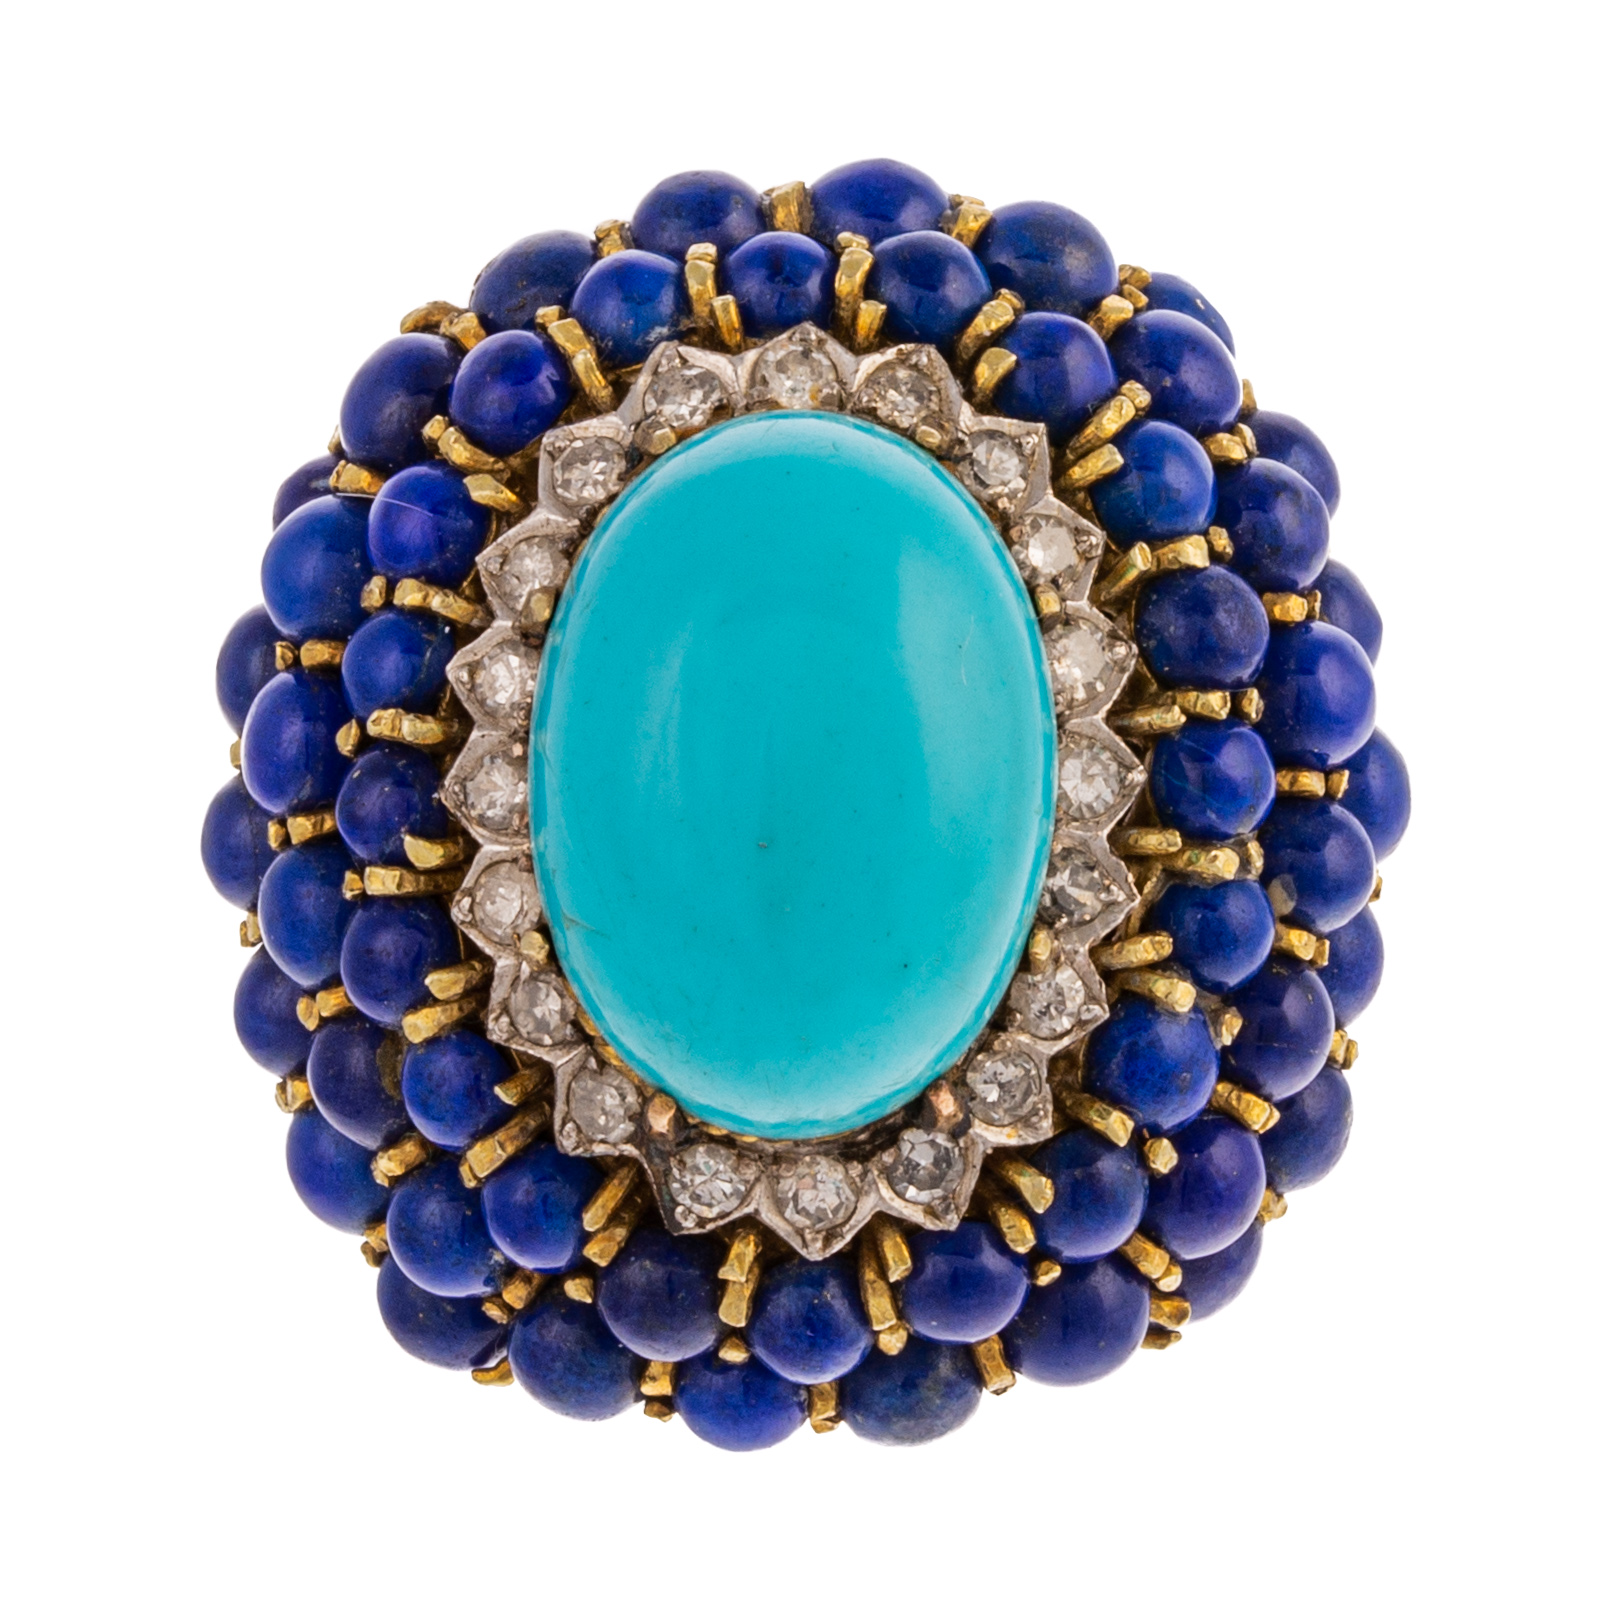 A TURQUOISE & LAPIS COCKTAIL RING